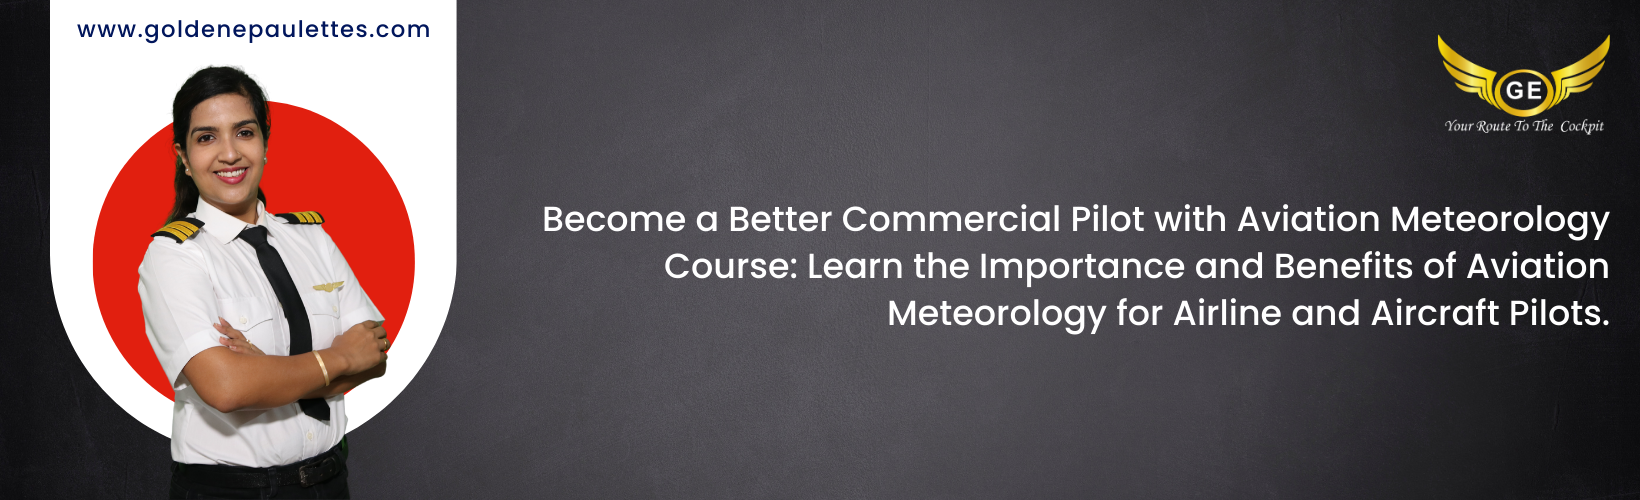 Aviation Meteorology Course and Pilot Training